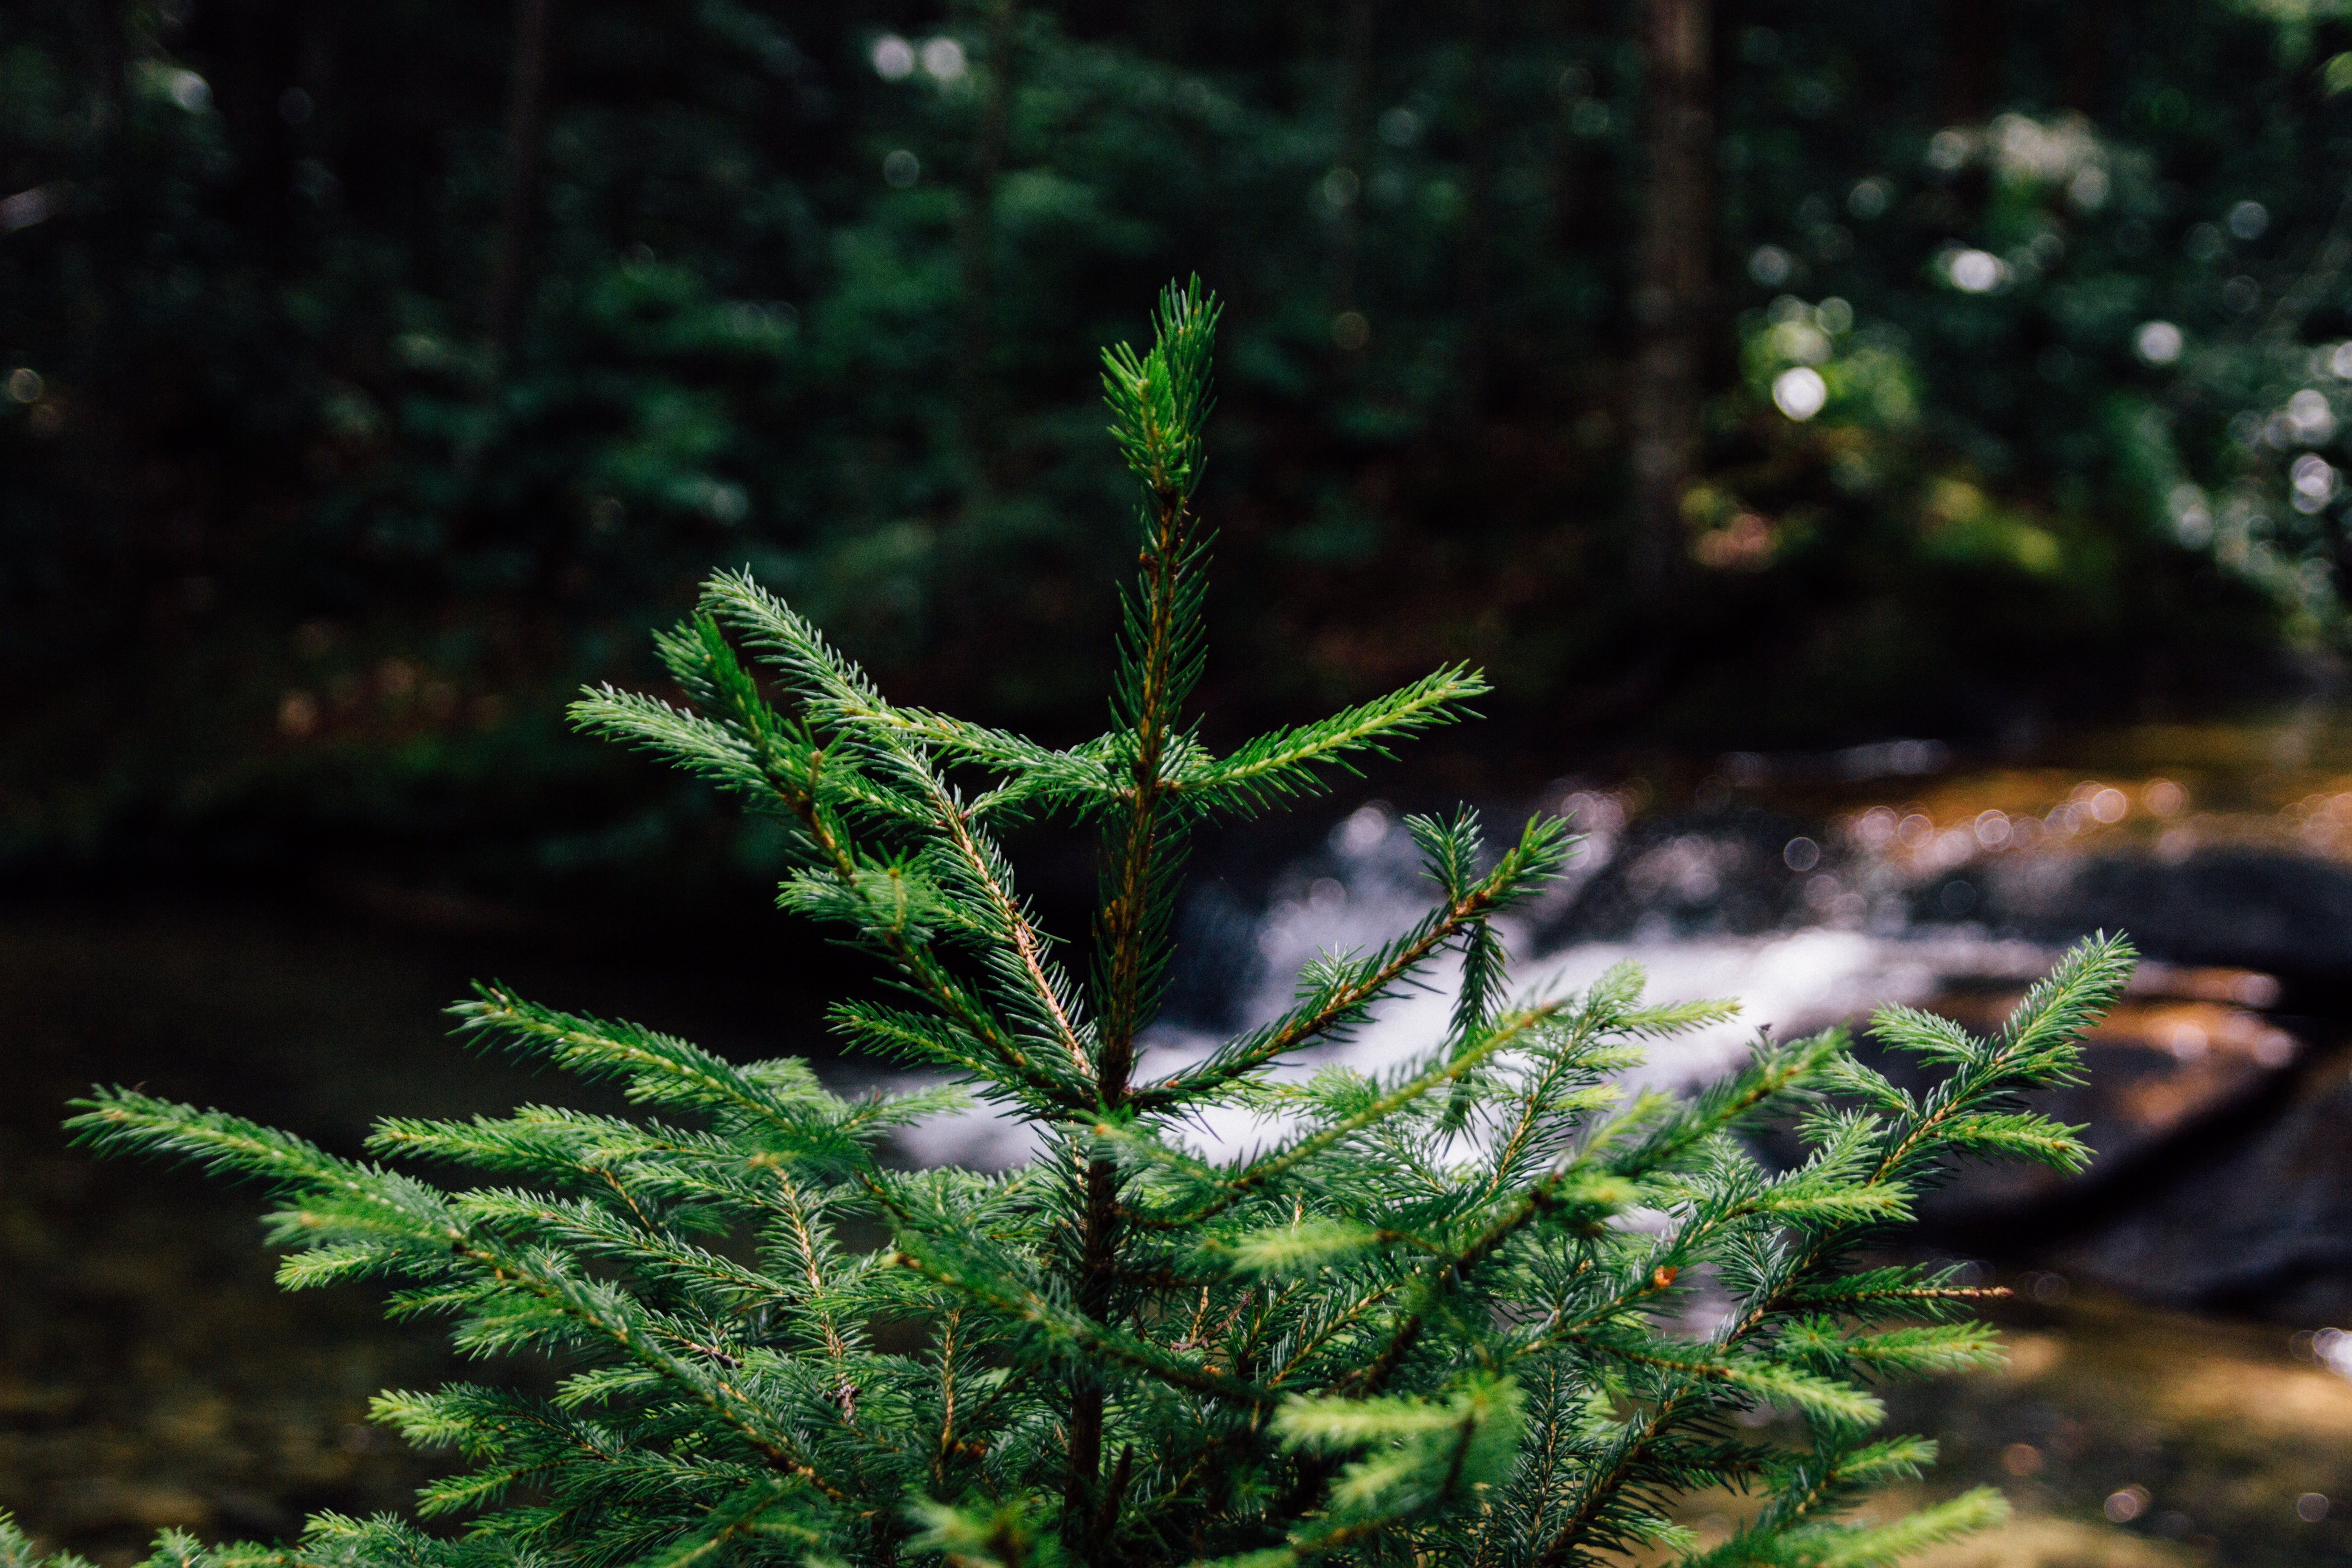 Branches of a young fir tree growing on the bank of a stream